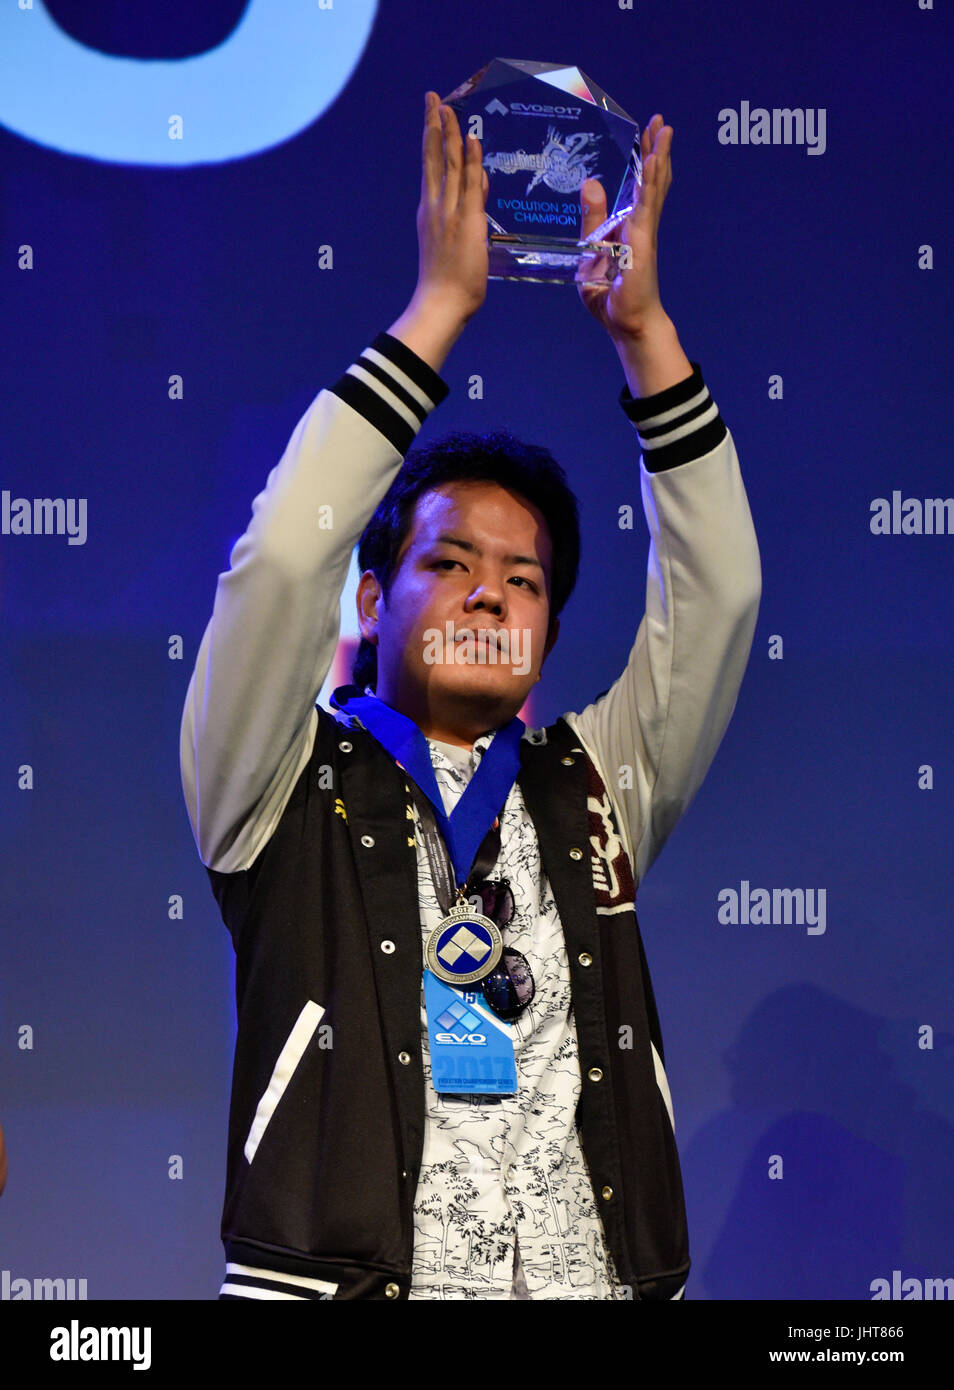 Las Vegas, Nevada, USA. 15th July, 2017. -  OMITO wins the grand final of Guilty Gear Xrd Rev 2 on day 2 at EVO 2017 - Credit: Ken Howard/Alamy Stock Photo